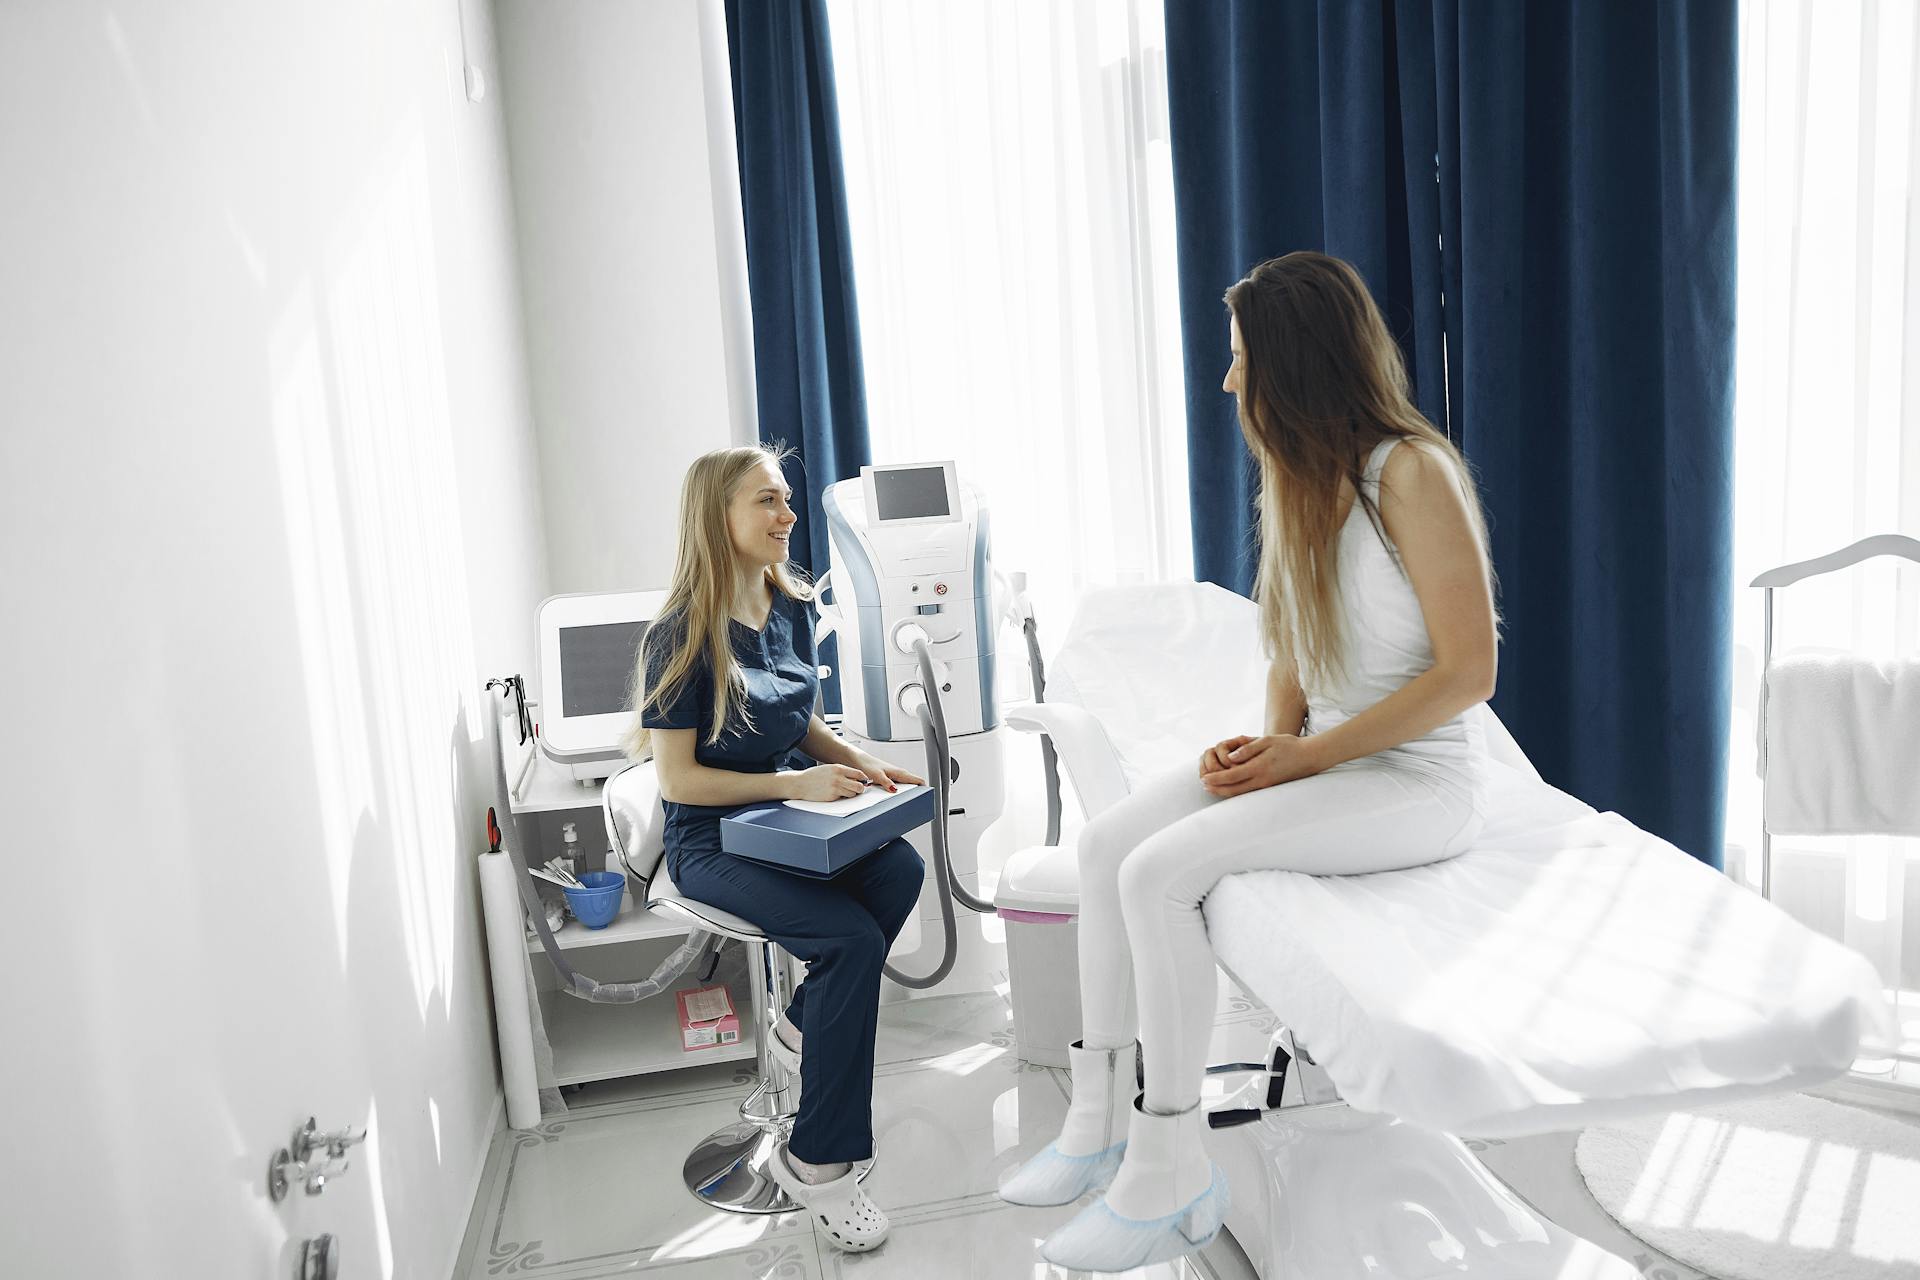 Woman in Blue Scrub Suit Helping Woman Sitting on Bed